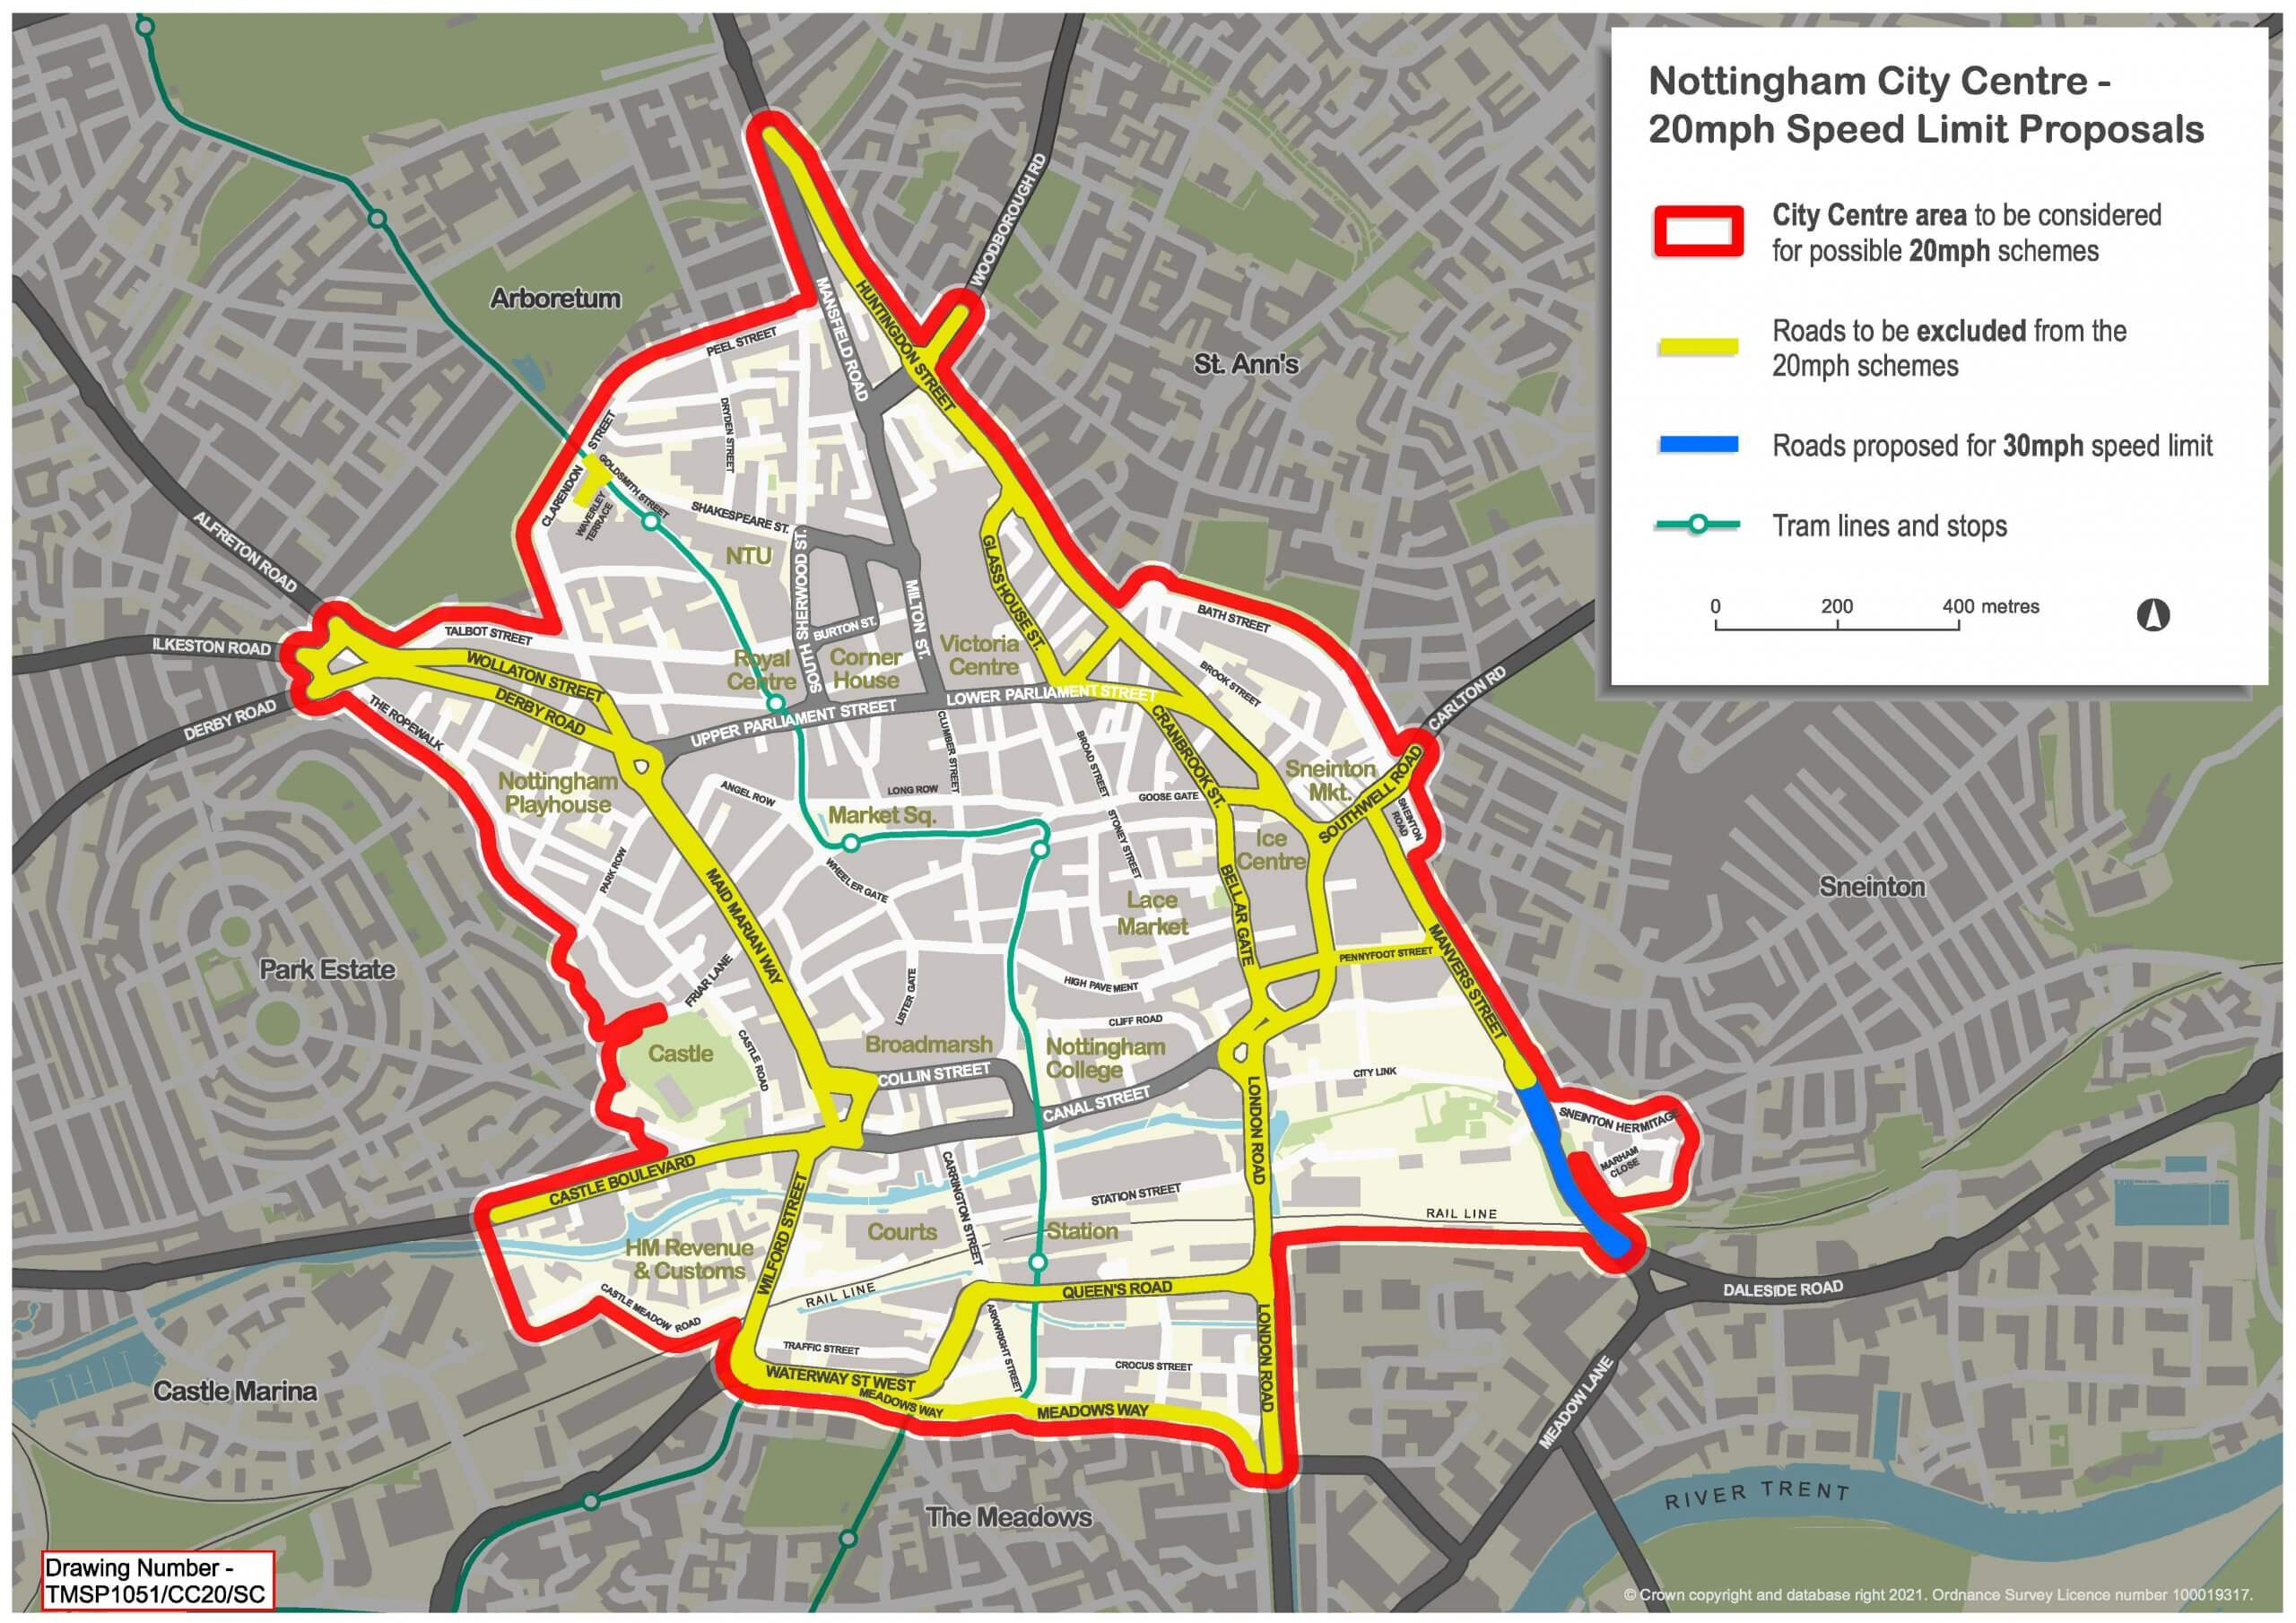 Map showing proposal of roads within Nottingham to become 20mph